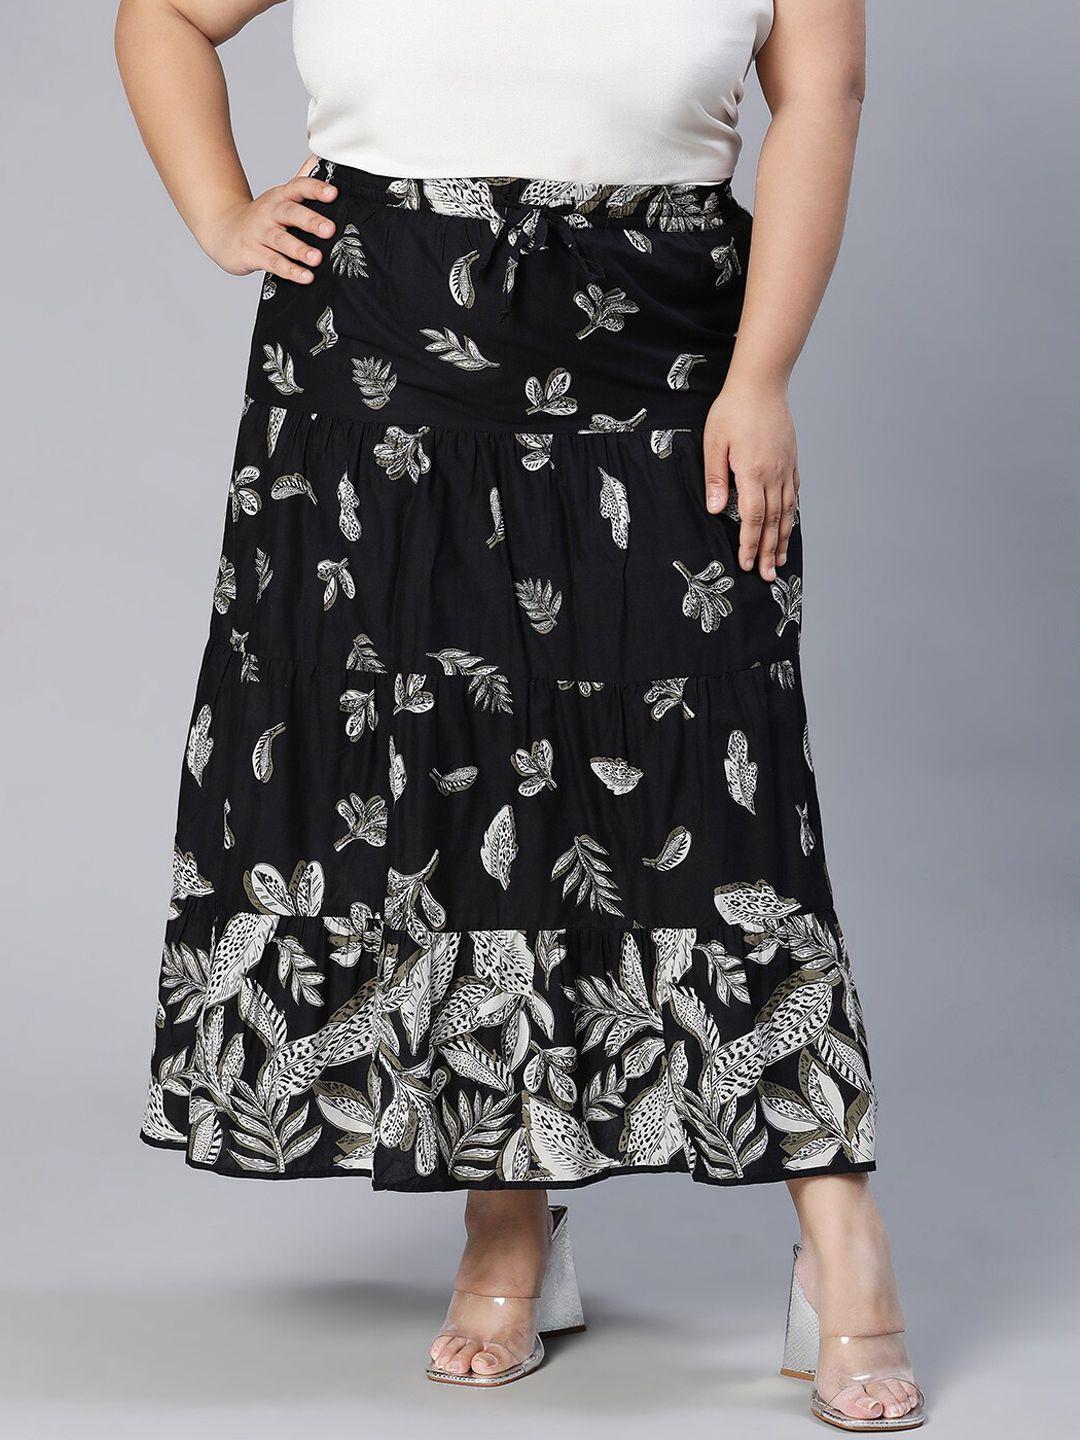 Oxolloxo Sublime Printed Plus Size Flared Maxi Skirt